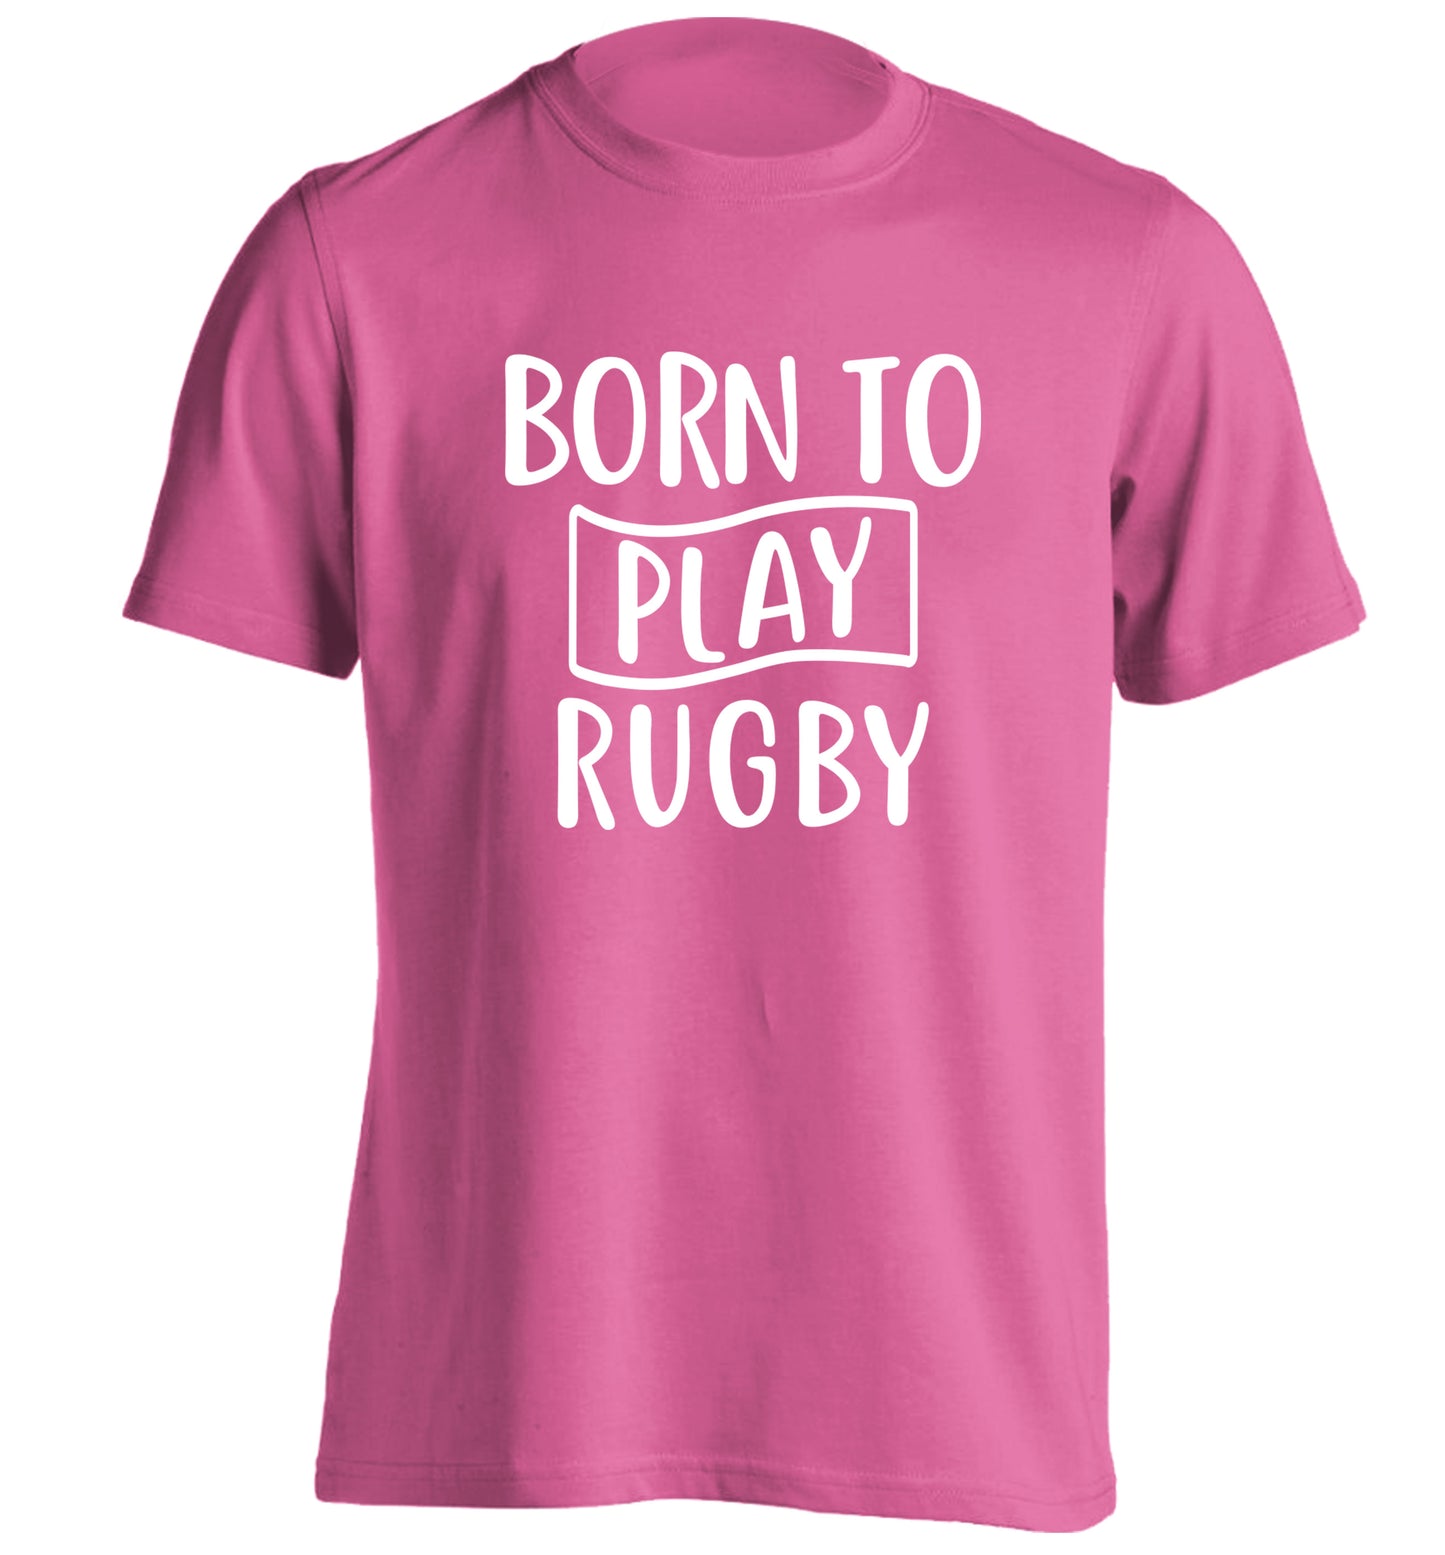 Born to play rugby adults unisex pink Tshirt 2XL